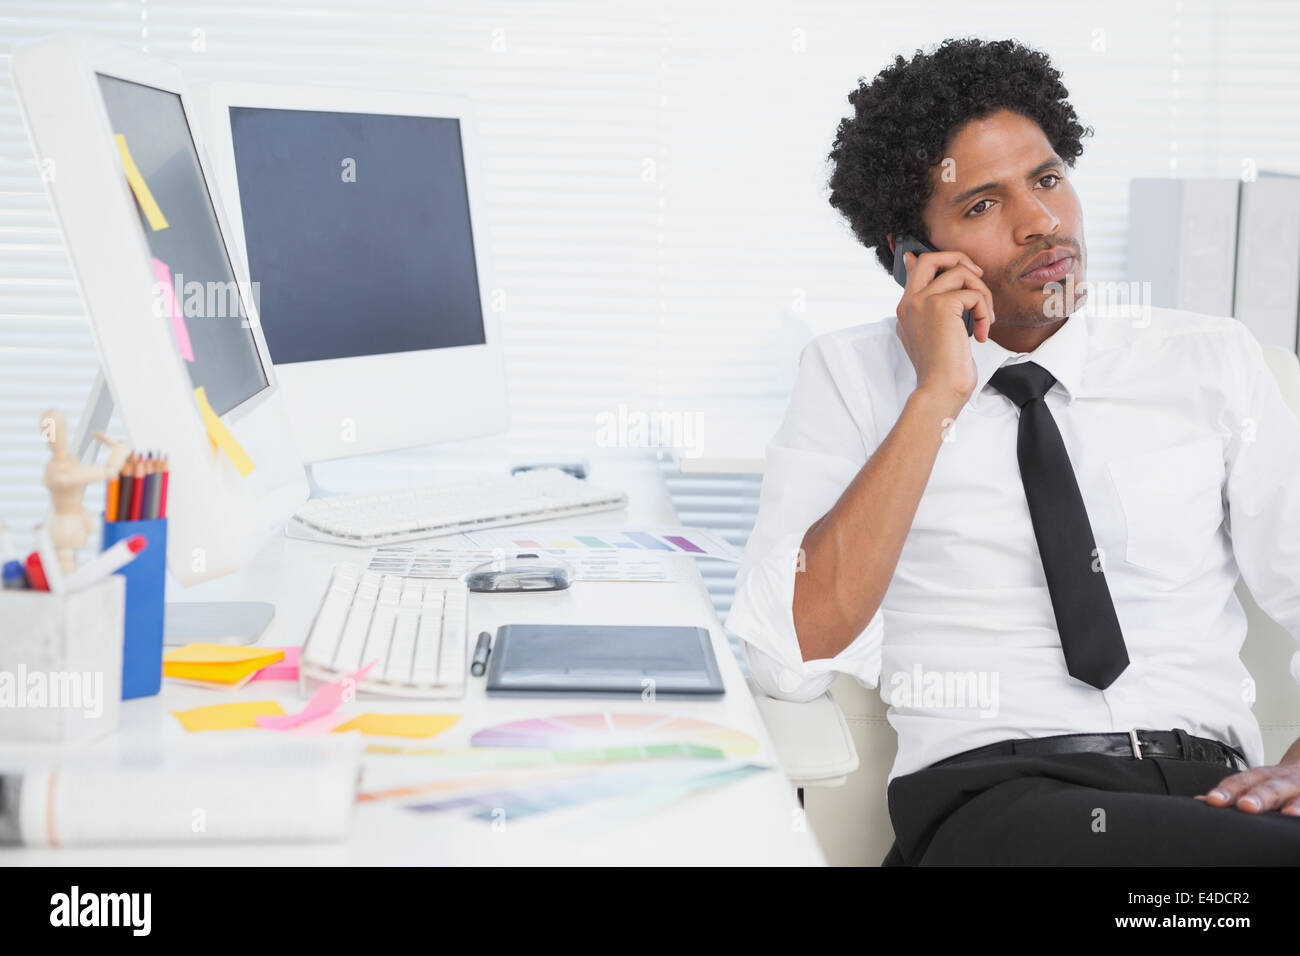 Serious businessman working at his desk on the phone Stock Photo